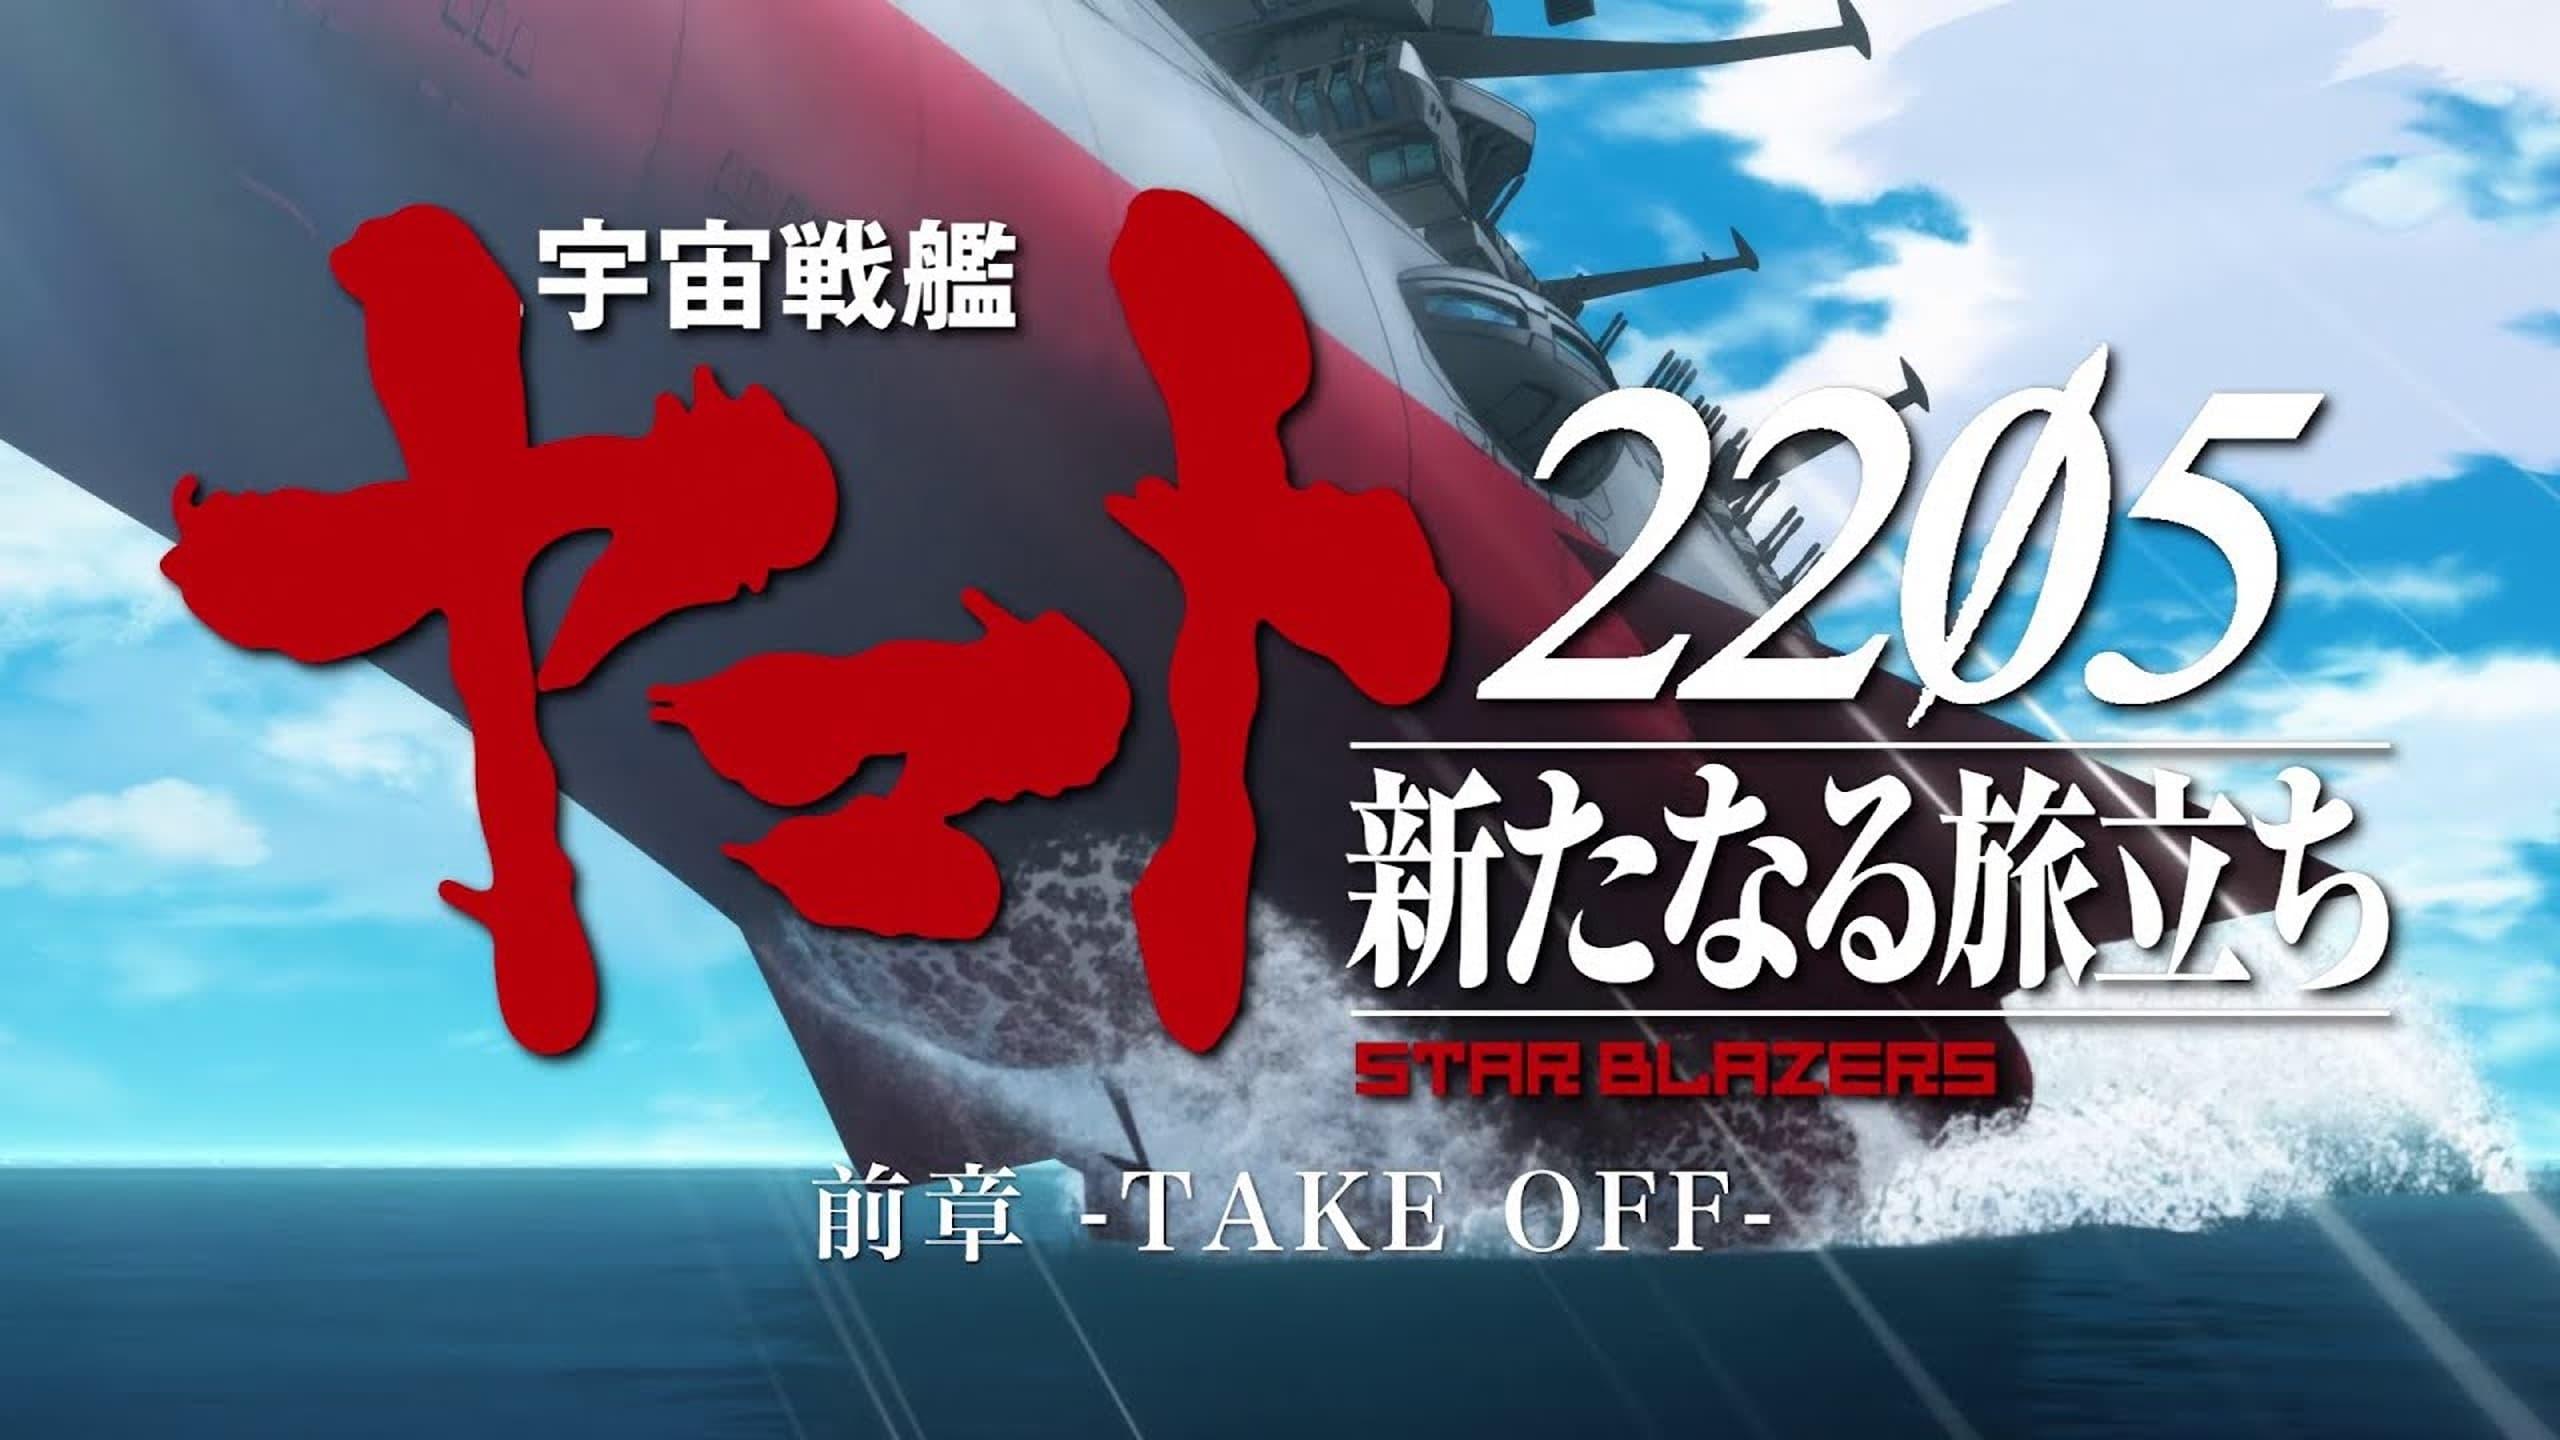 Space Battleship Yamato 2205: The New Voyage - Prior Chapter: Take Off backdrop